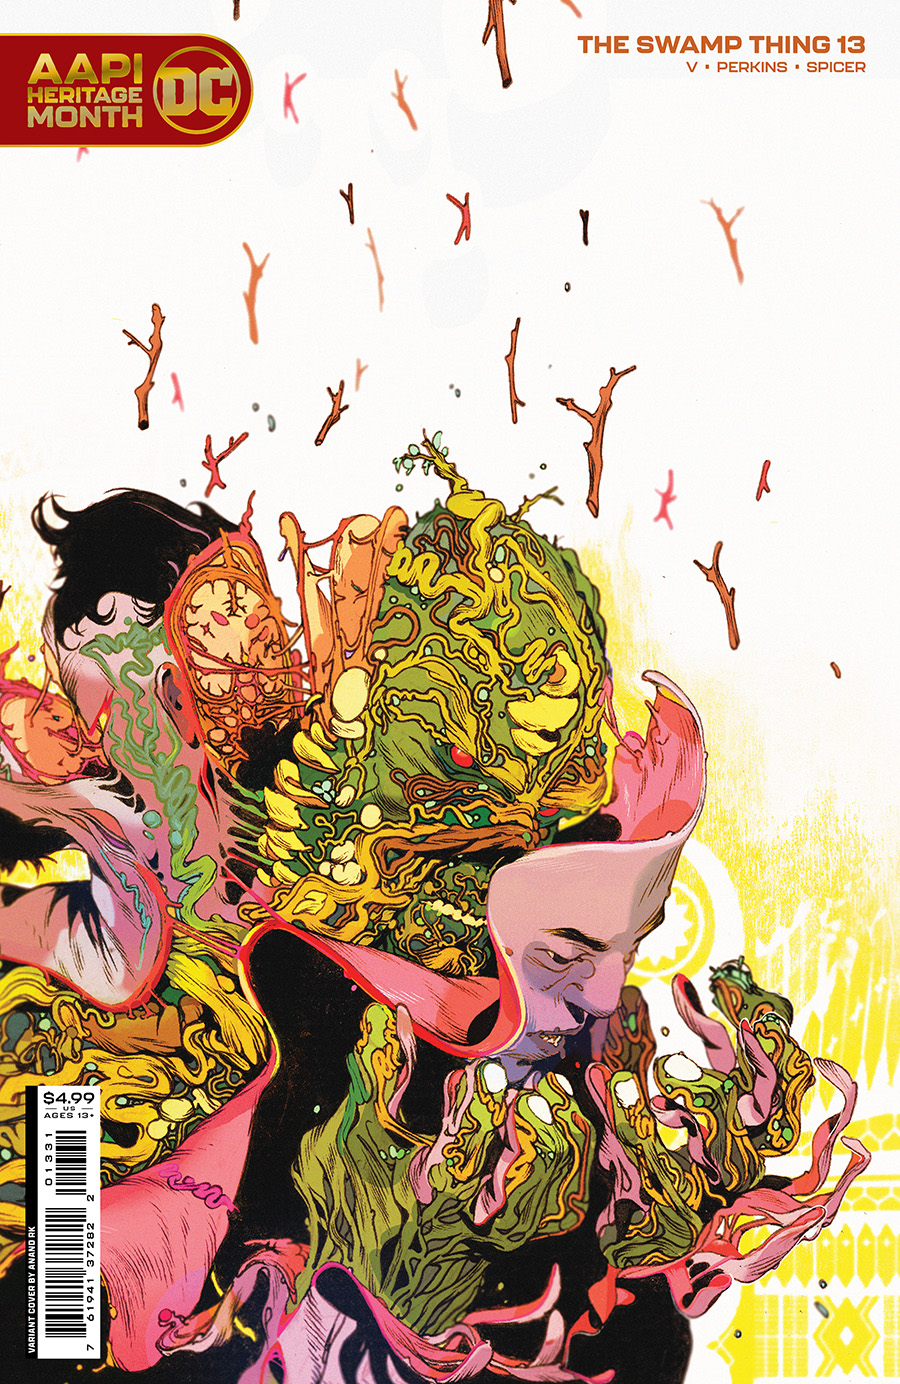 Swamp Thing Vol 7 #13 Cover C Variant Anand RK AAPI Card Stock Cover